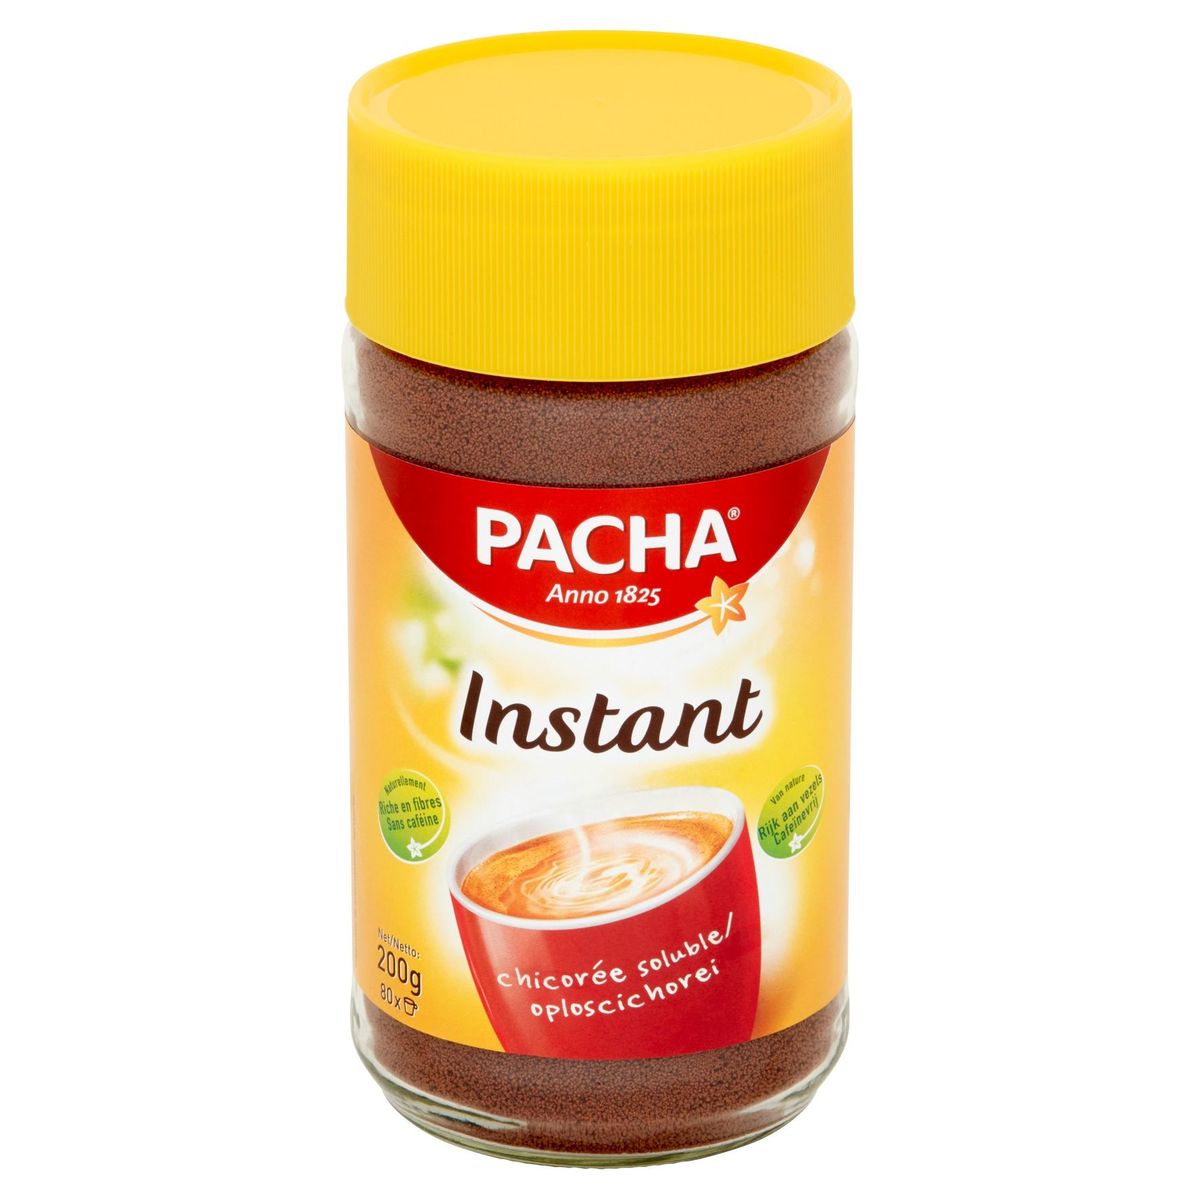 Pacha Instant Chicorée Soluble 200 g